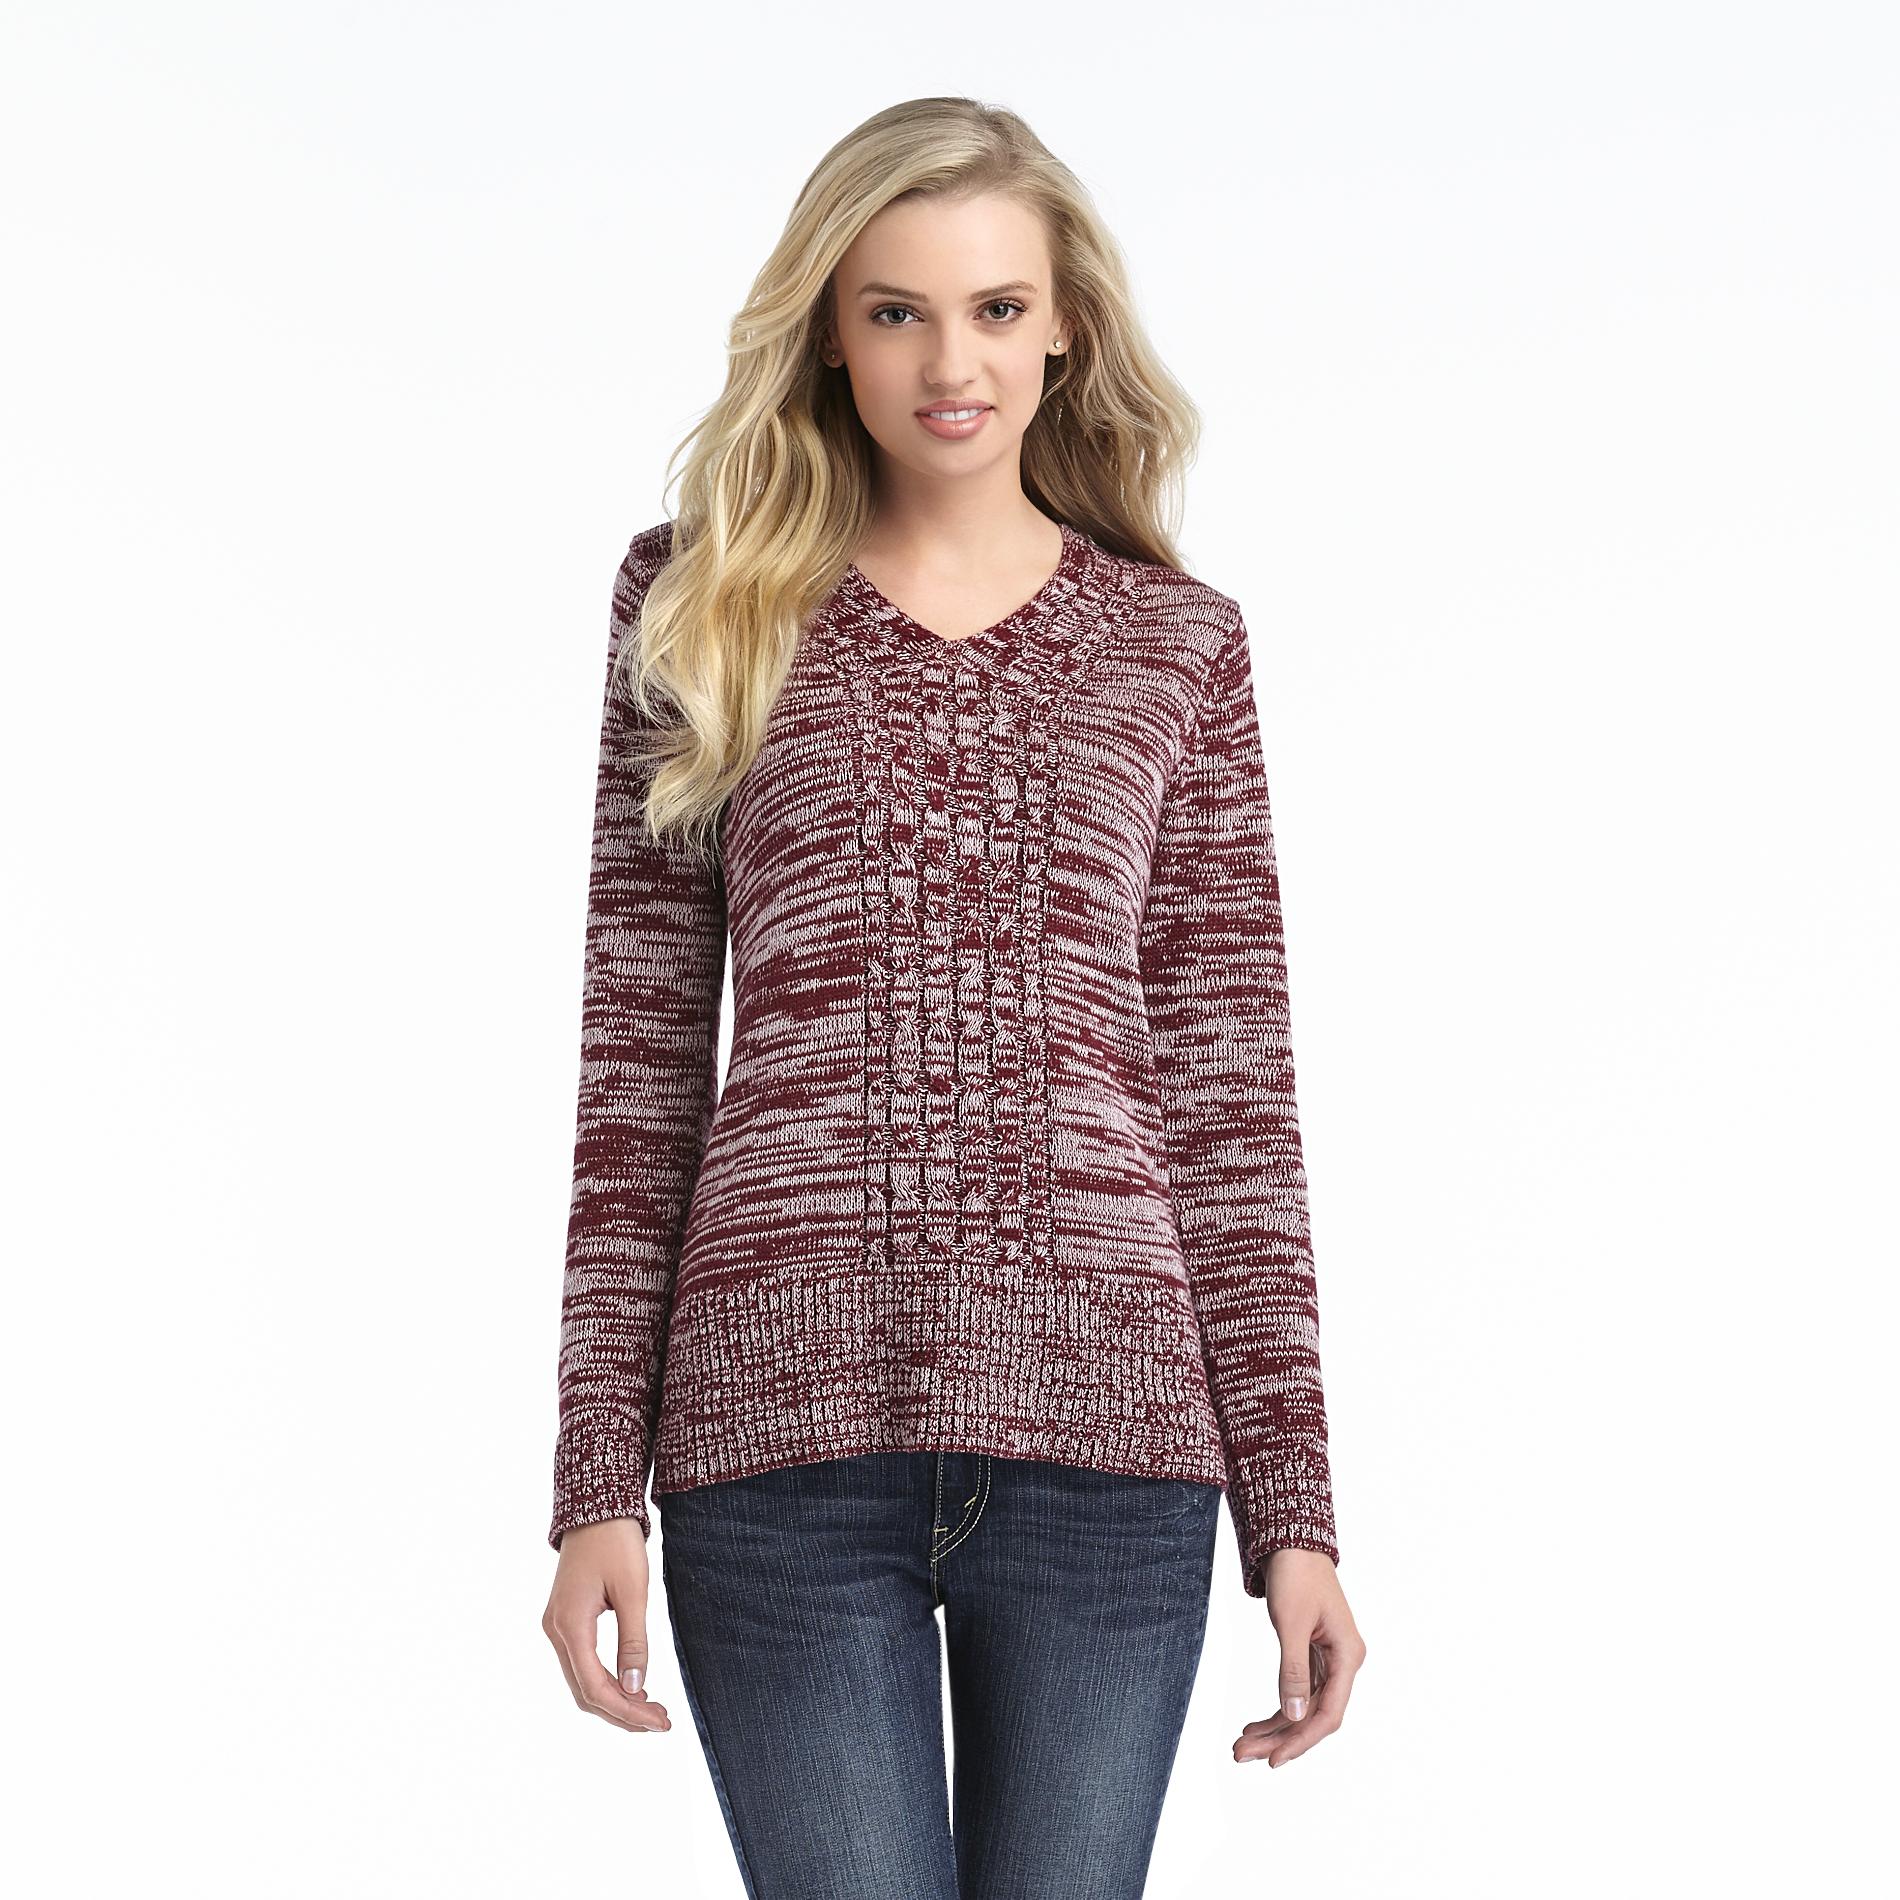 Basic Editions Women's Cable Knit Sweater - Marled